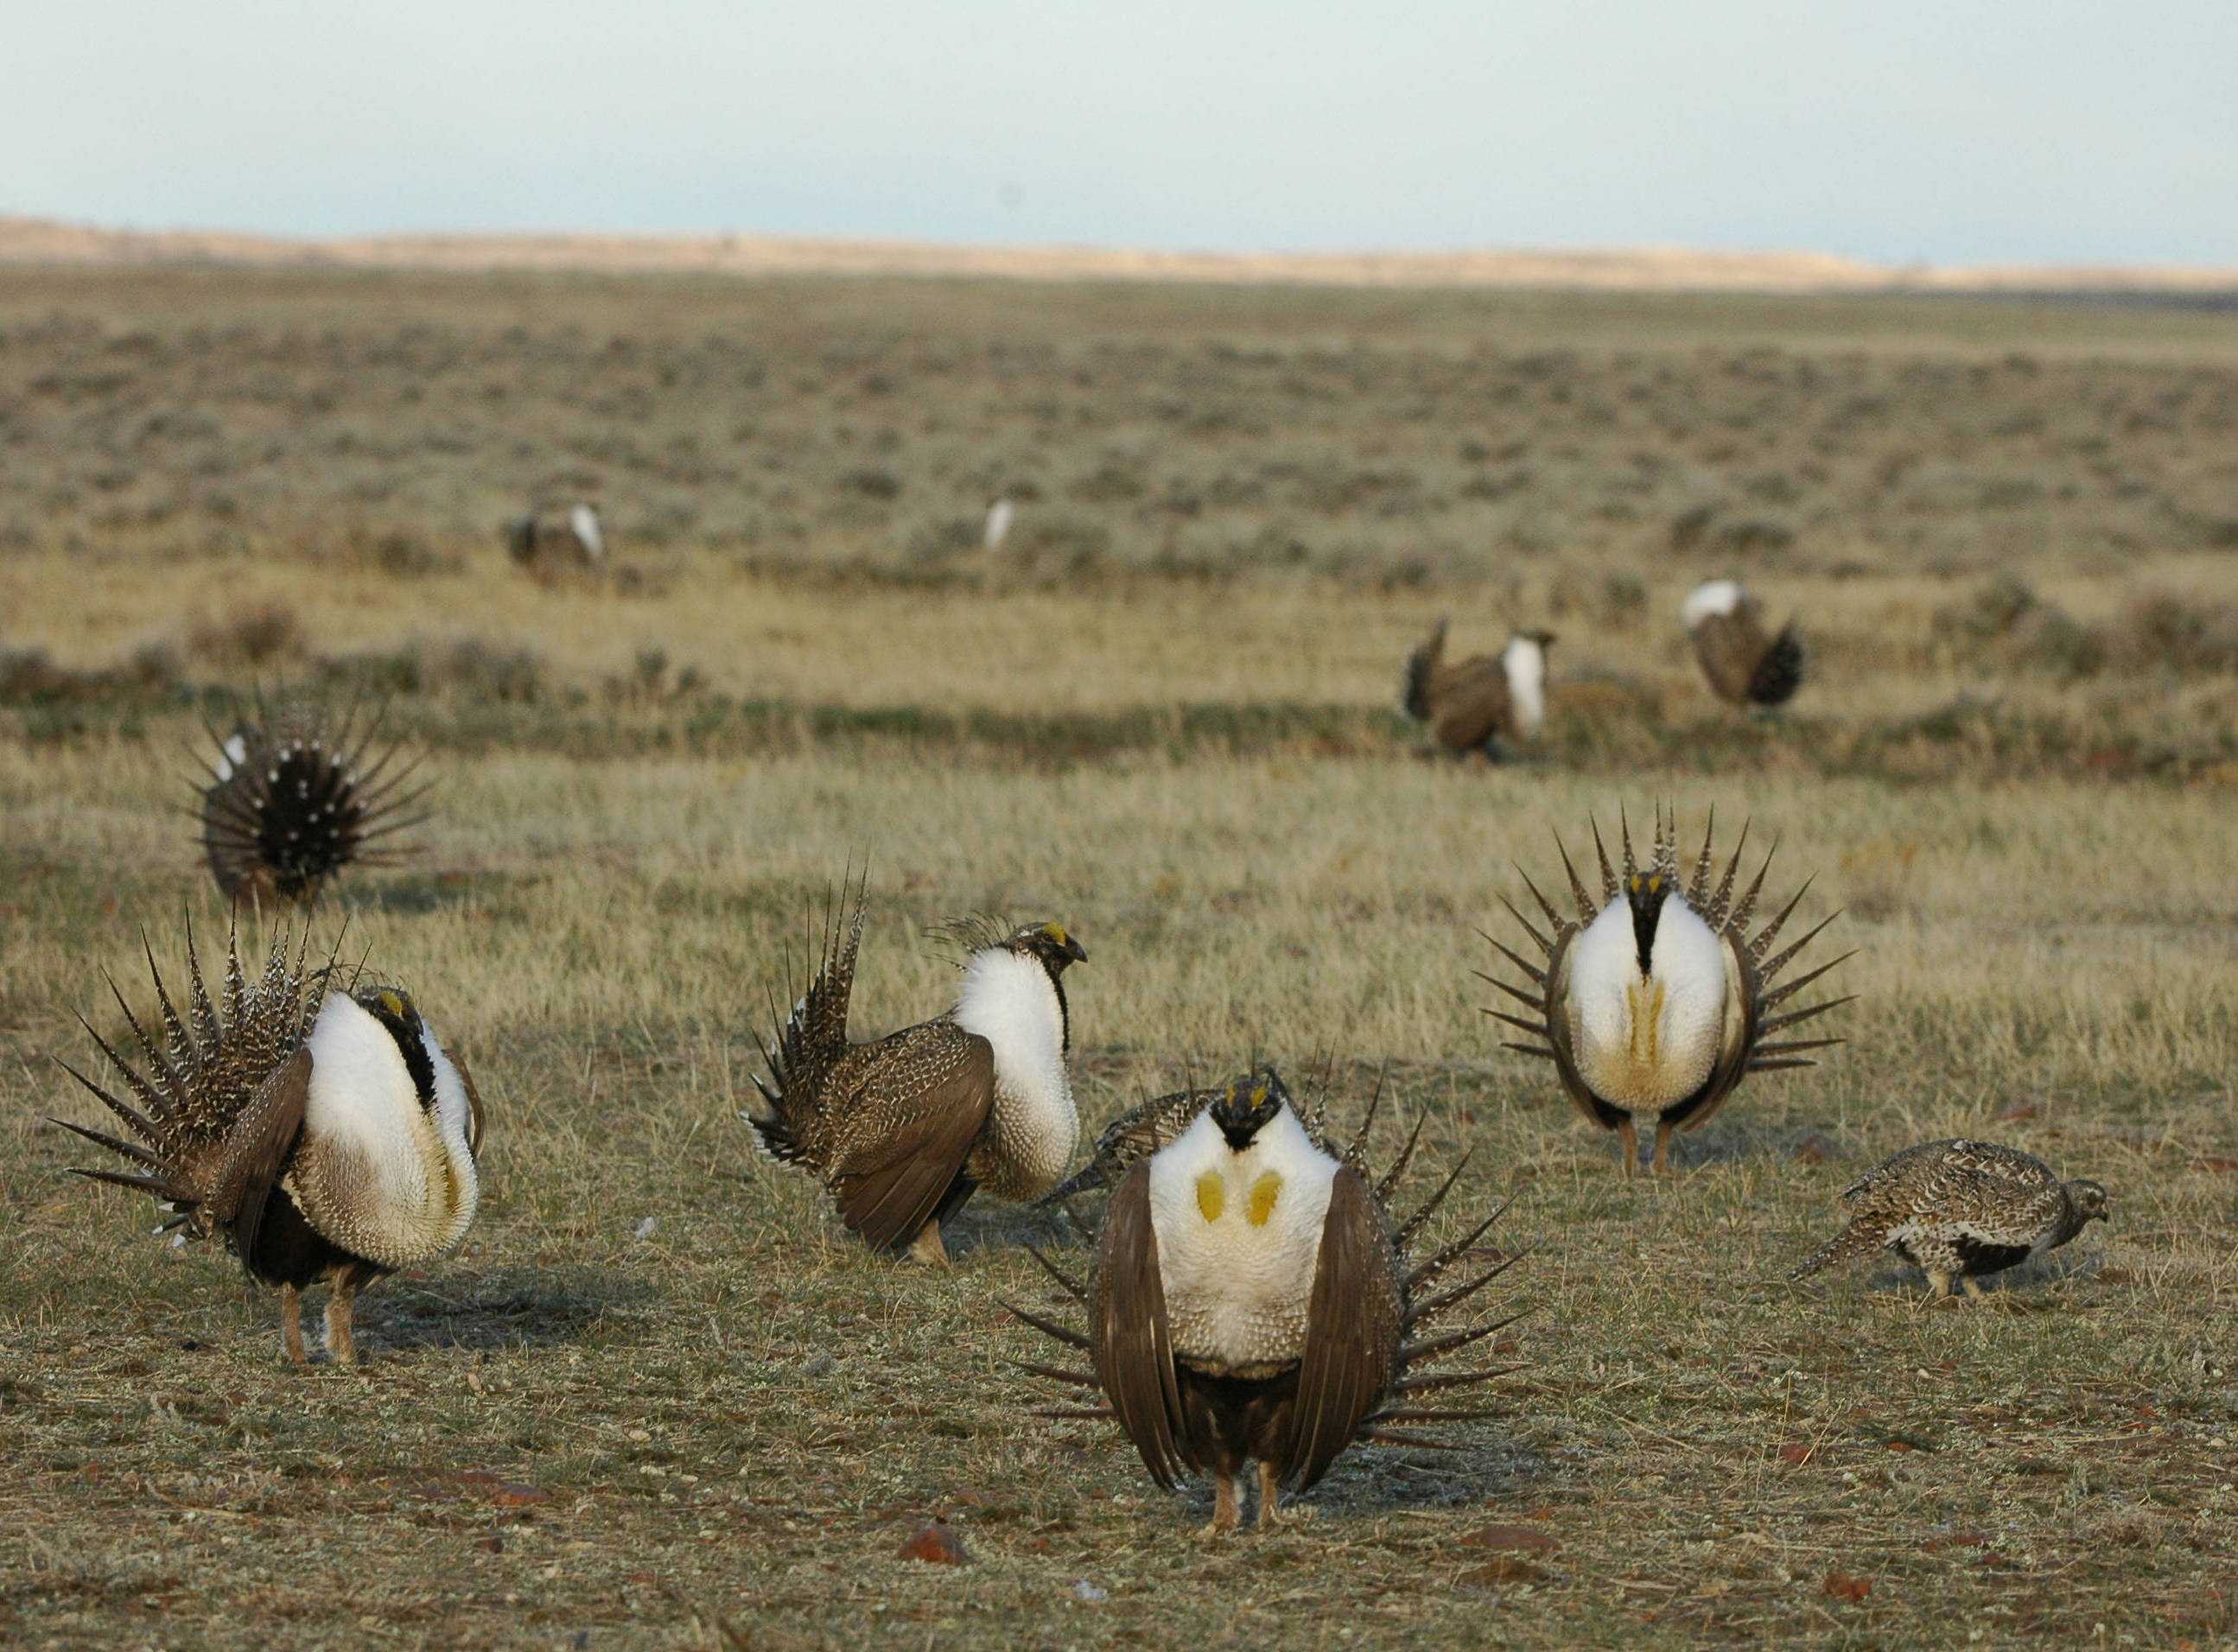 Input needed on review of sagebrush ecosystems to support greater ...